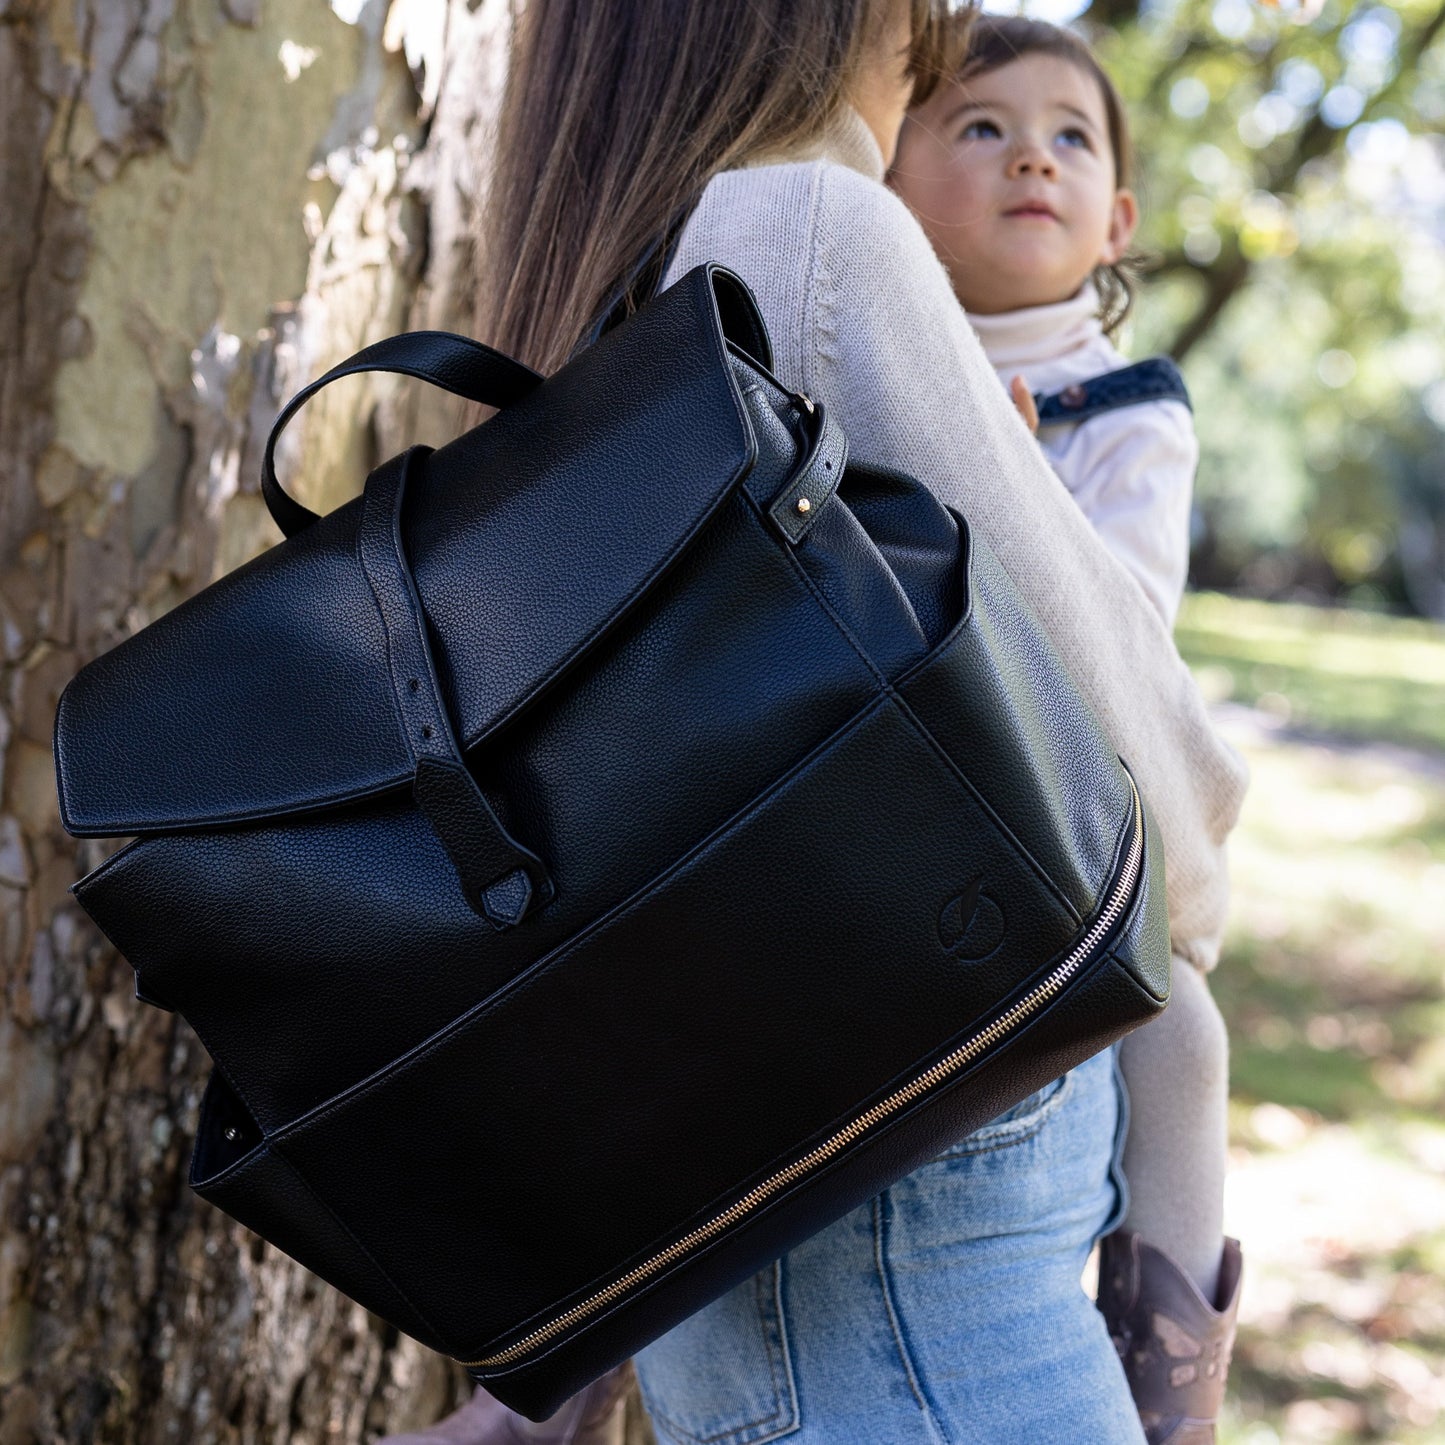 woman wearing Florence convertible totepack backpack and holding child.